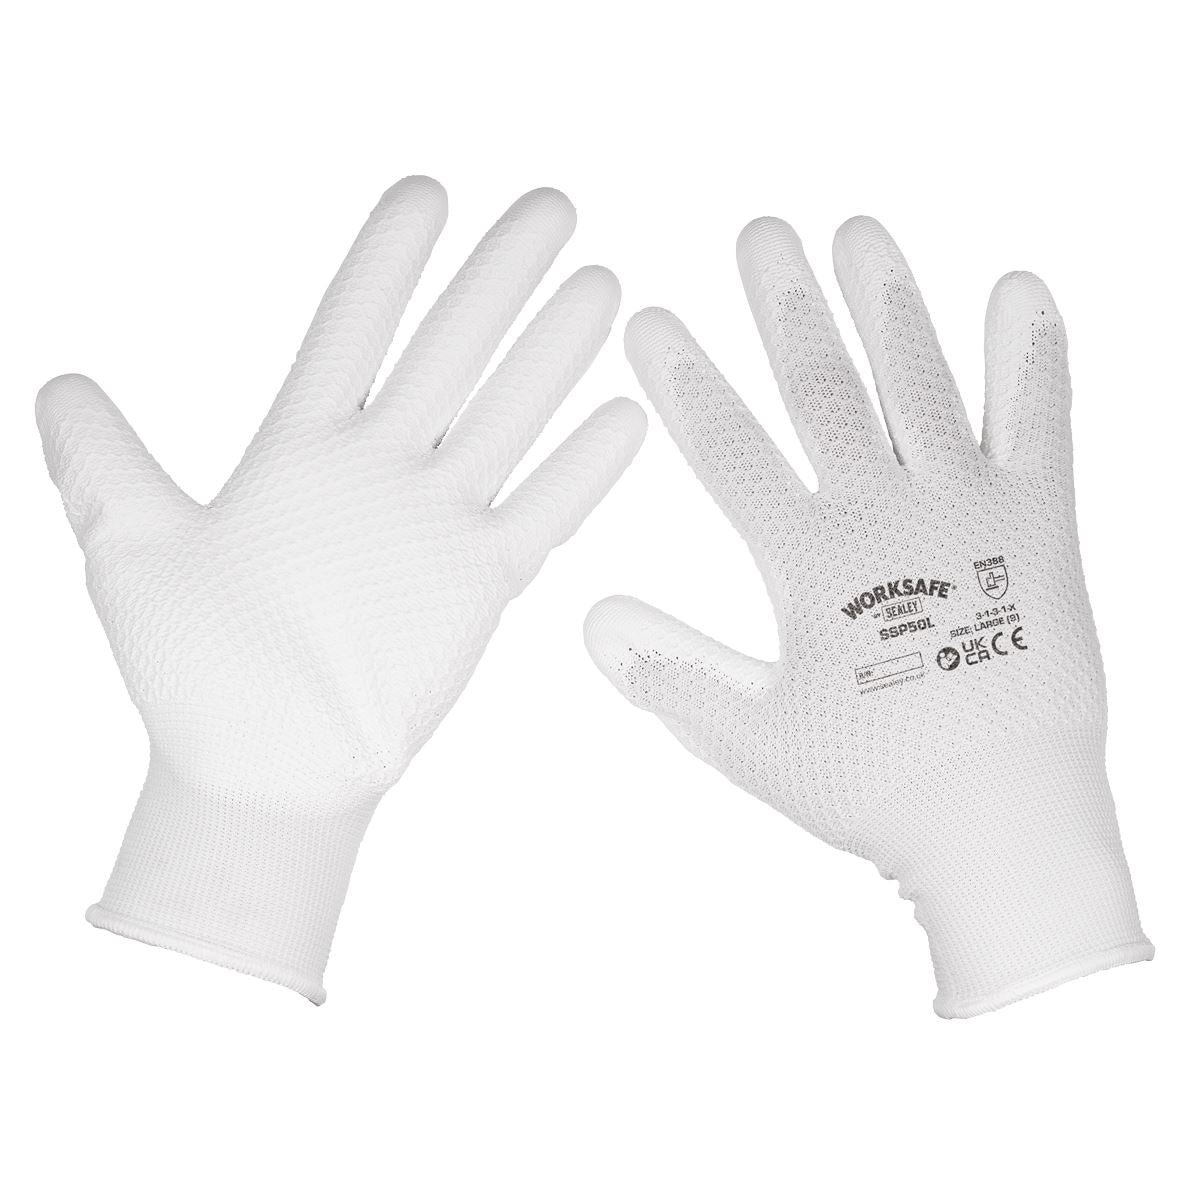 Worksafe by Sealey White Precision Grip Gloves - (Large) - Pack of 6 Pairs